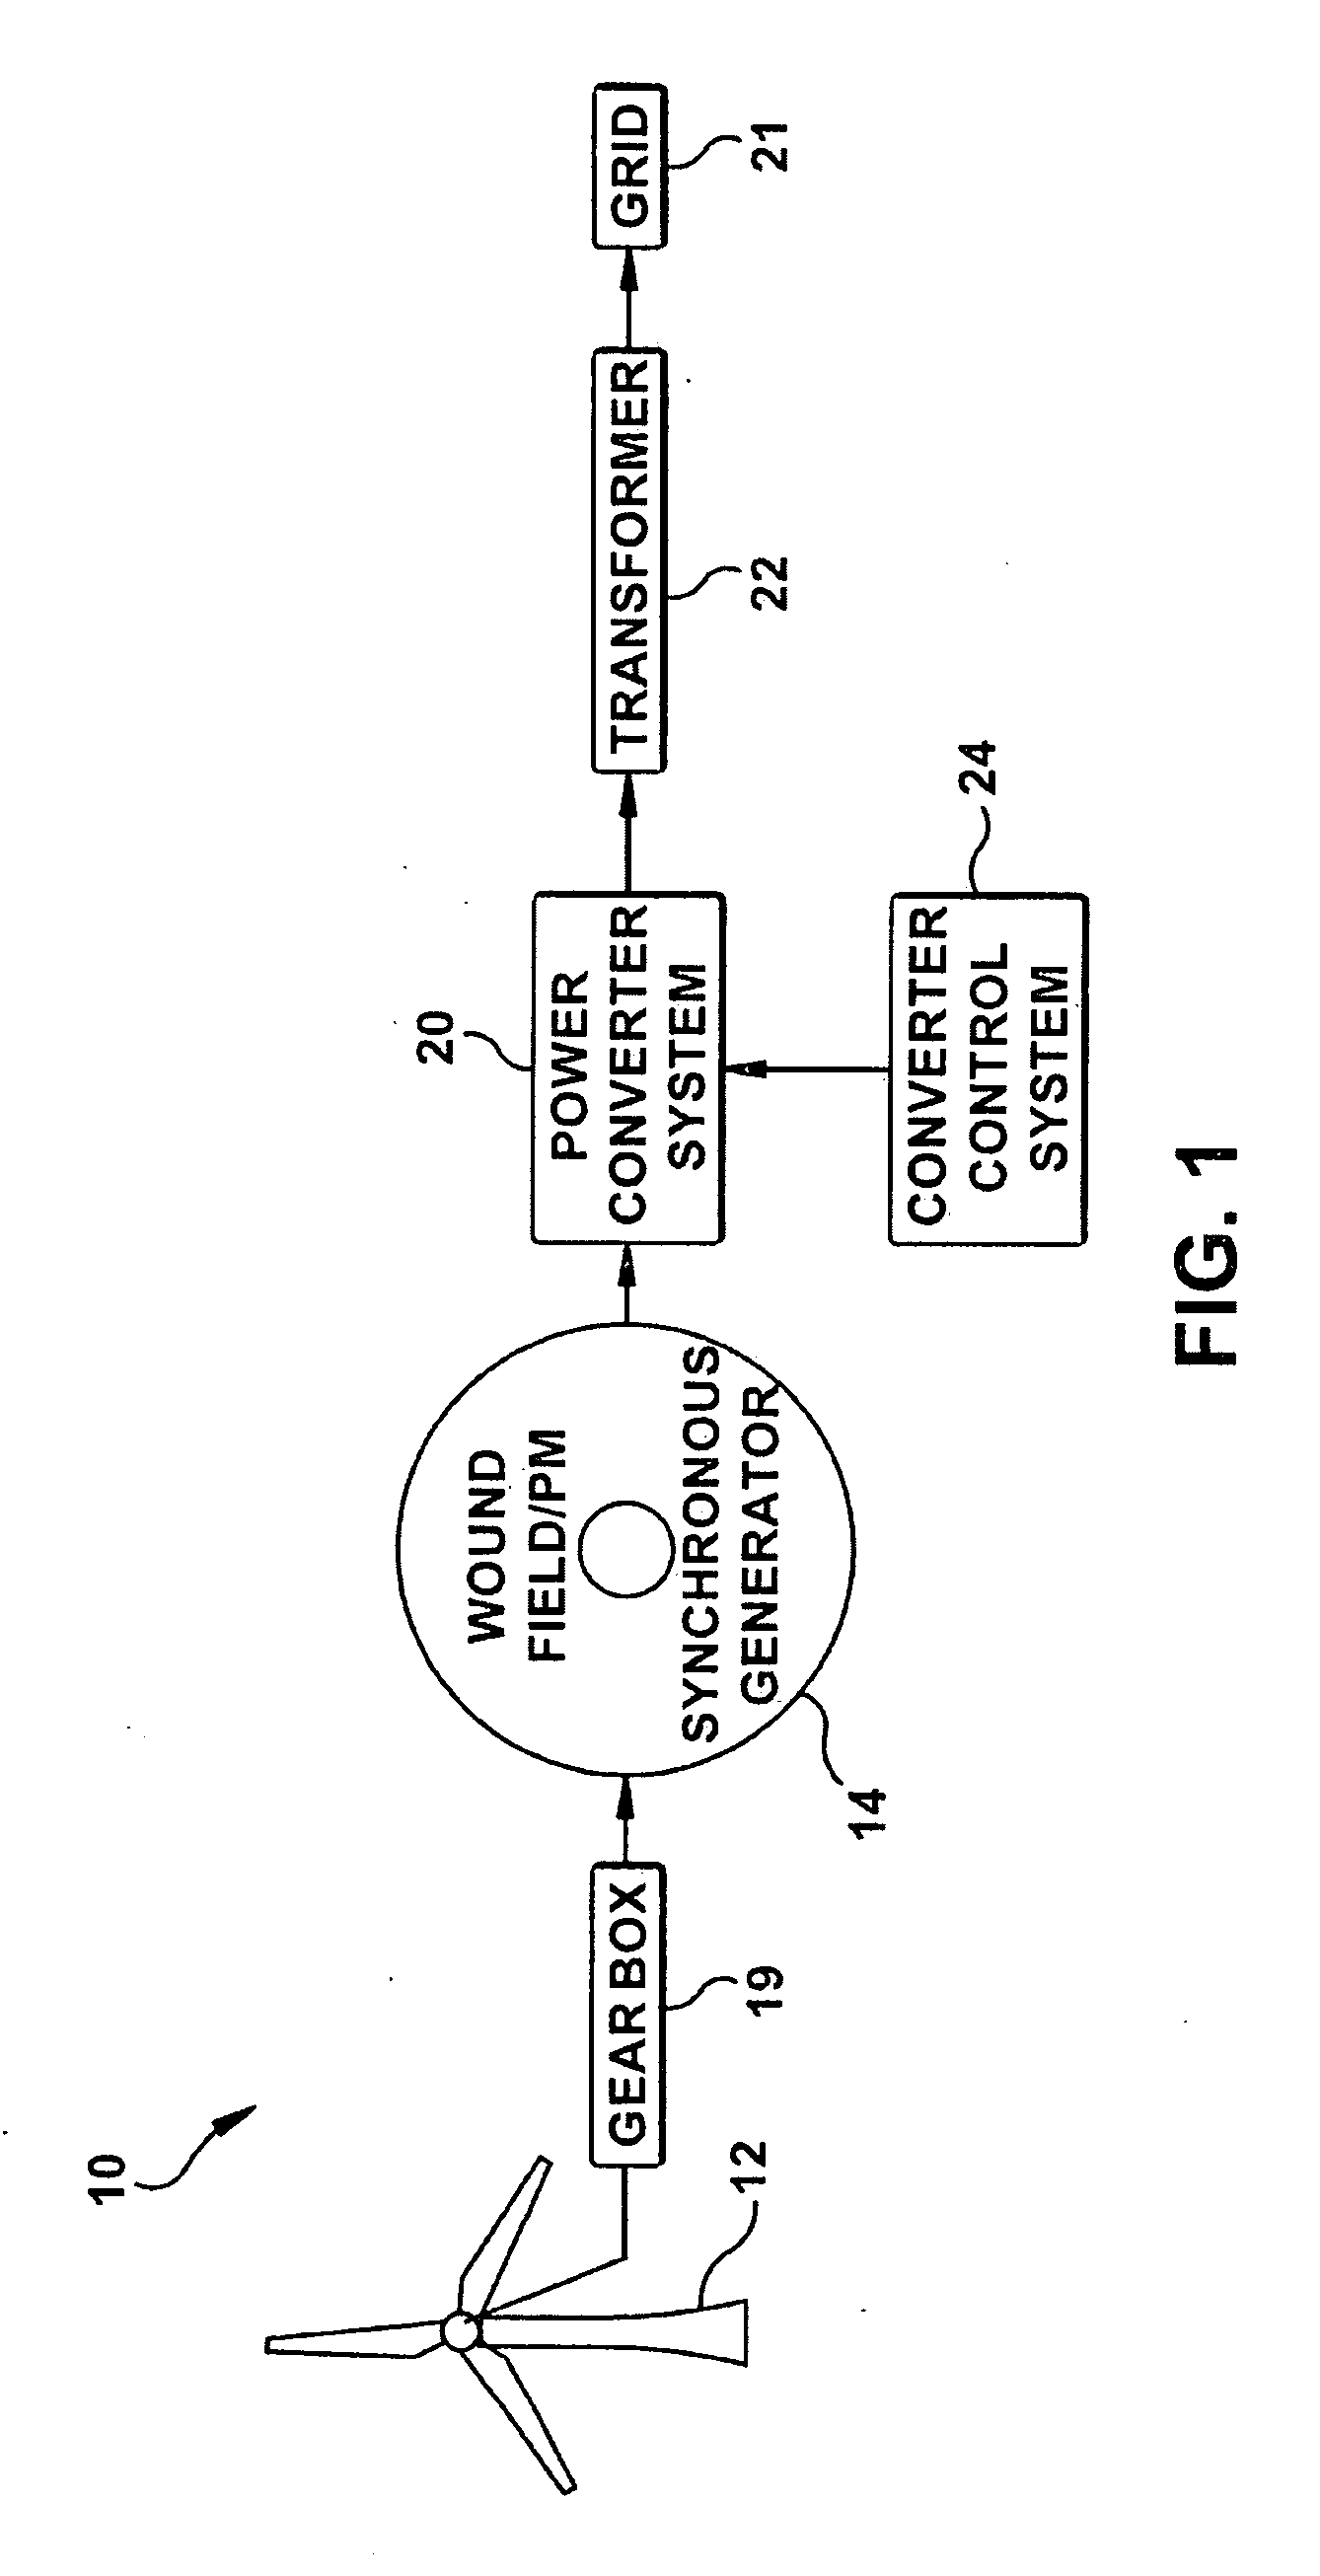 Wind turbine with parallel converters utilizing a plurality of isolated generator windings